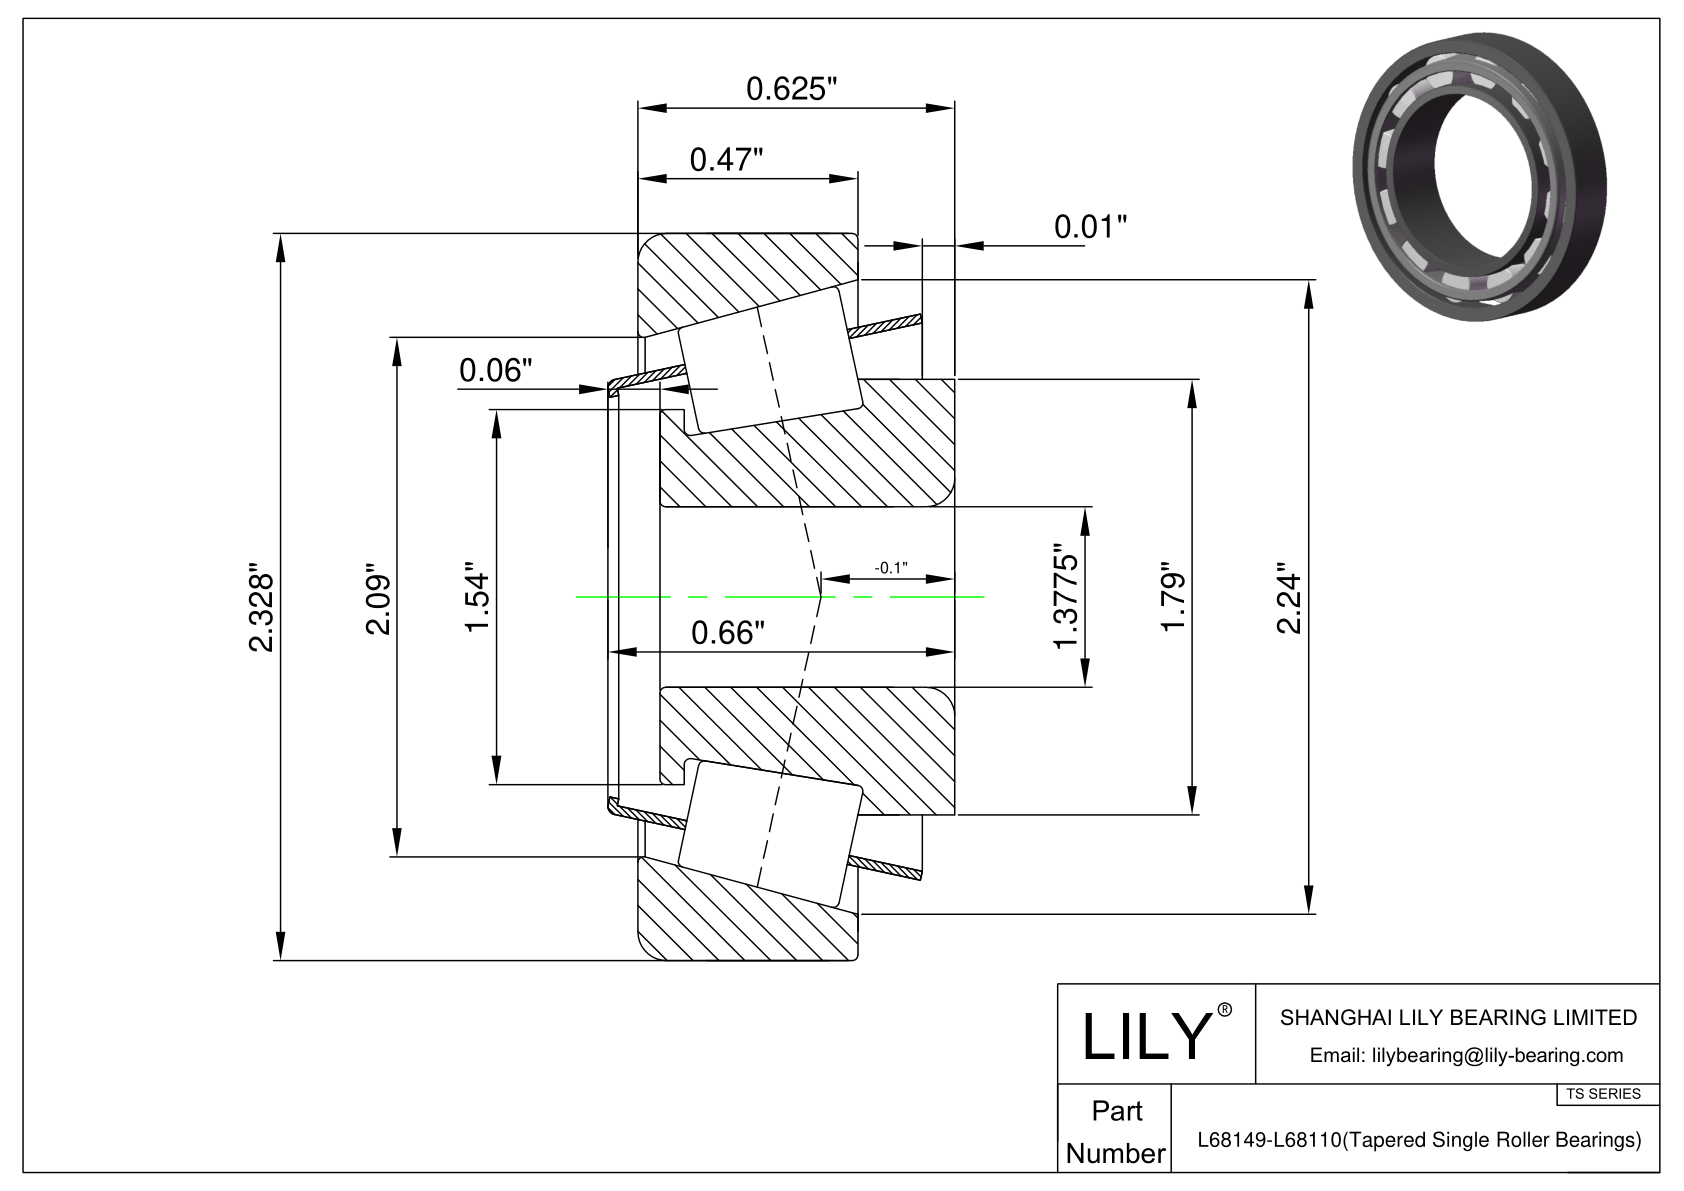 L68149-L68110 TS (Tapered Single Roller Bearings) (Imperial) cad drawing